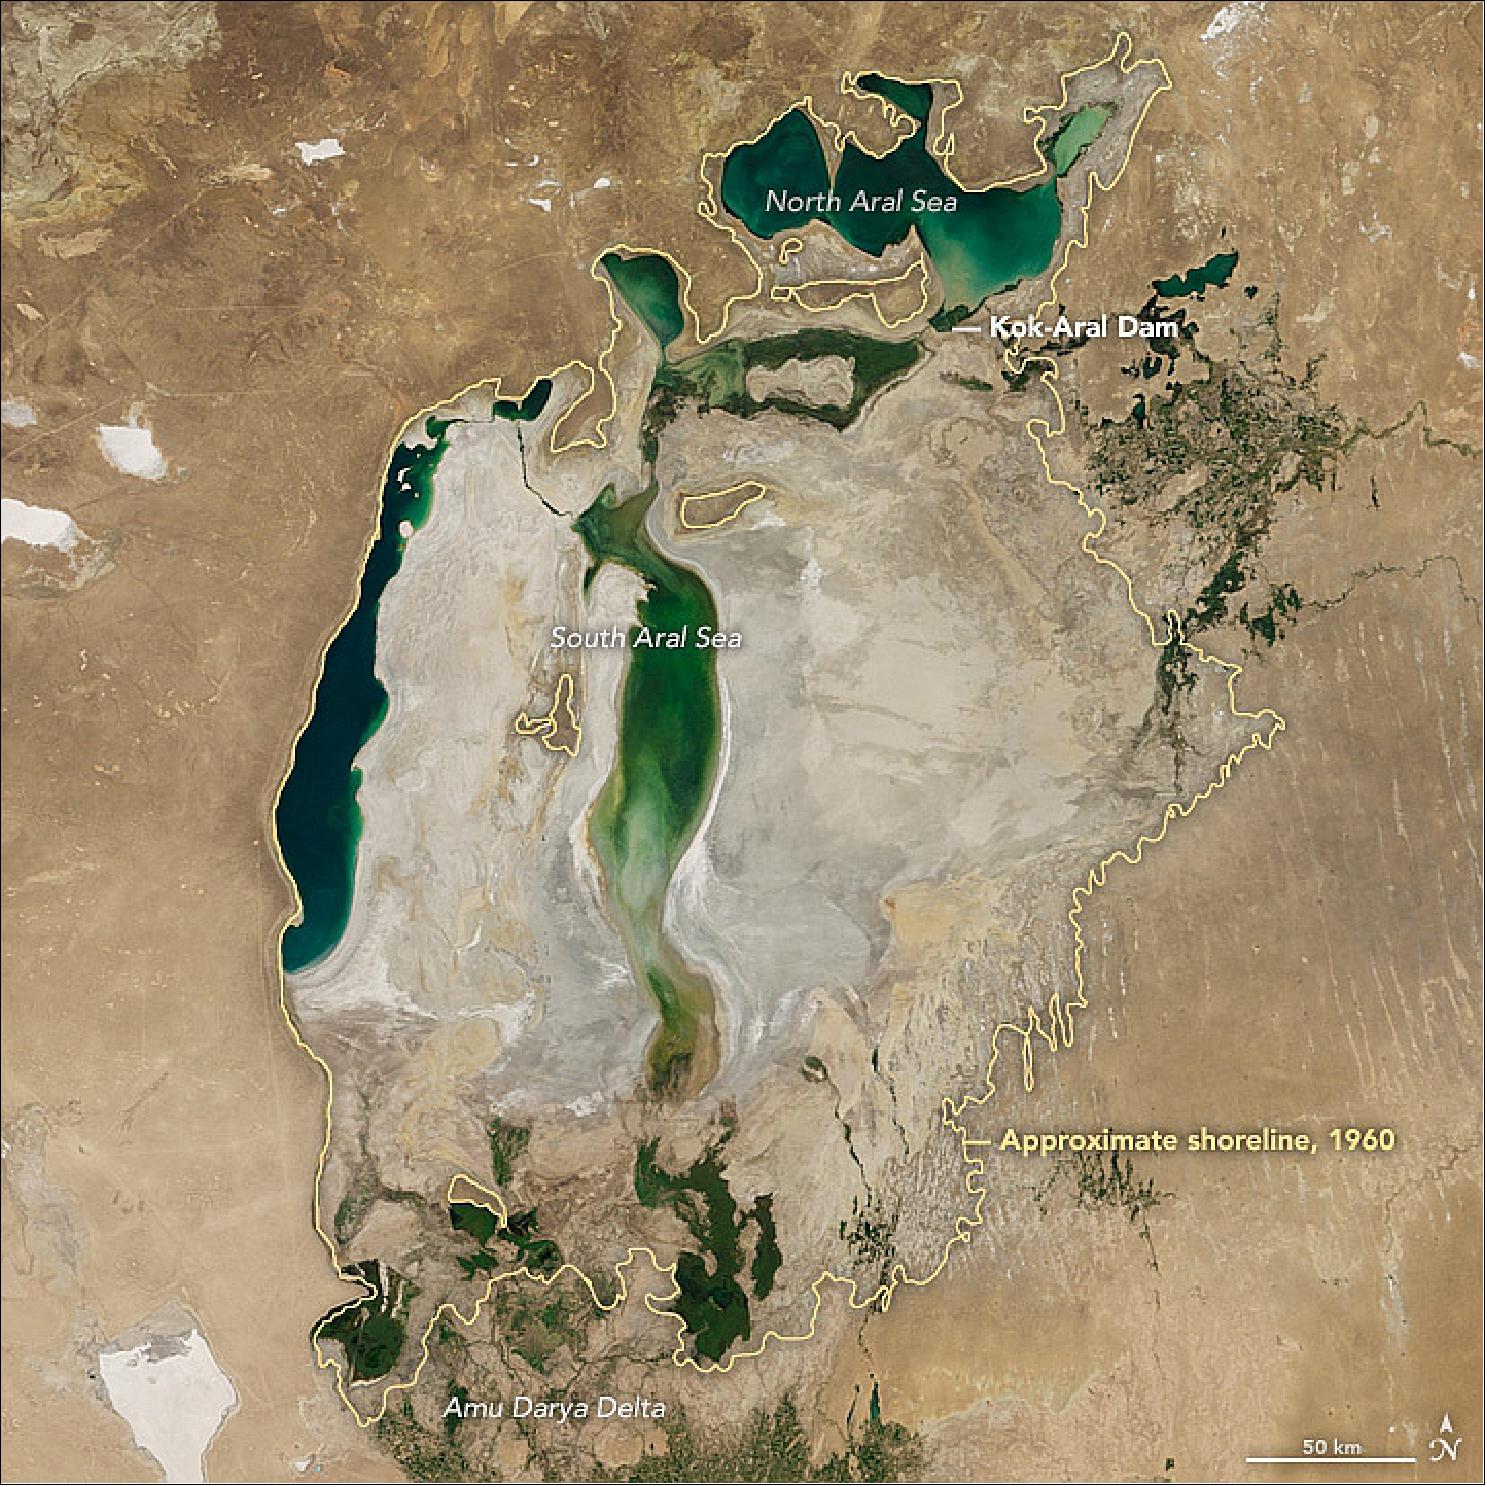 Figure 60: MODIS image of the Aral Sea in Russia, acquired on August 22, 2017 (image credit: NASA Earth Observatory image by Jesse Allen, using Terra MODIS data from the LANCE (Land Atmosphere Near real-time Capability for EOS), Story by Adam Voiland)